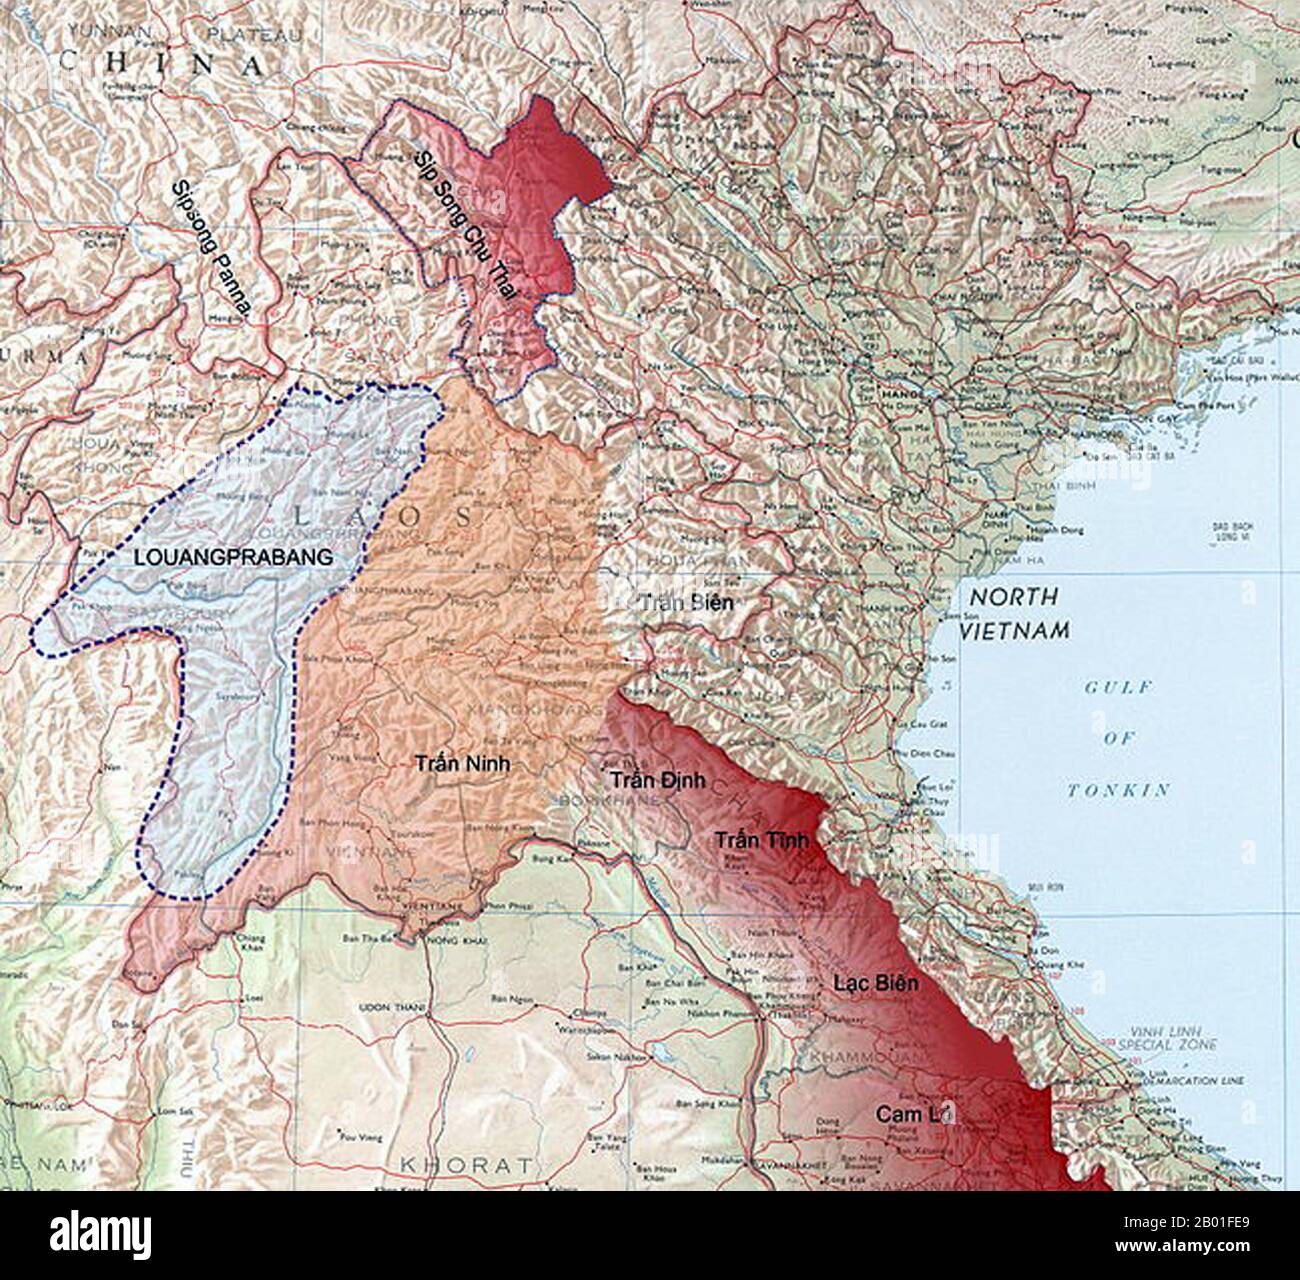 Vietnam/Laos: Map showing location of the autonomous Tai Principality of Sipsongchuthai in relation to Tonkin and to Luang Prabang, c. 1893.  During the late 19th century, all the territory stretching from Dien Bien Phu in the south to the Chinese frontier in the north formed an autonomous region called Sipsongchutai, or ‘Twelve Tai Principalities’. It was ruled over by a hereditary White Tai prince from his capital at Lai Chau and paid tribute, at one time or another, to Siam, Vietnam or China, and sometimes to all three. Stock Photo